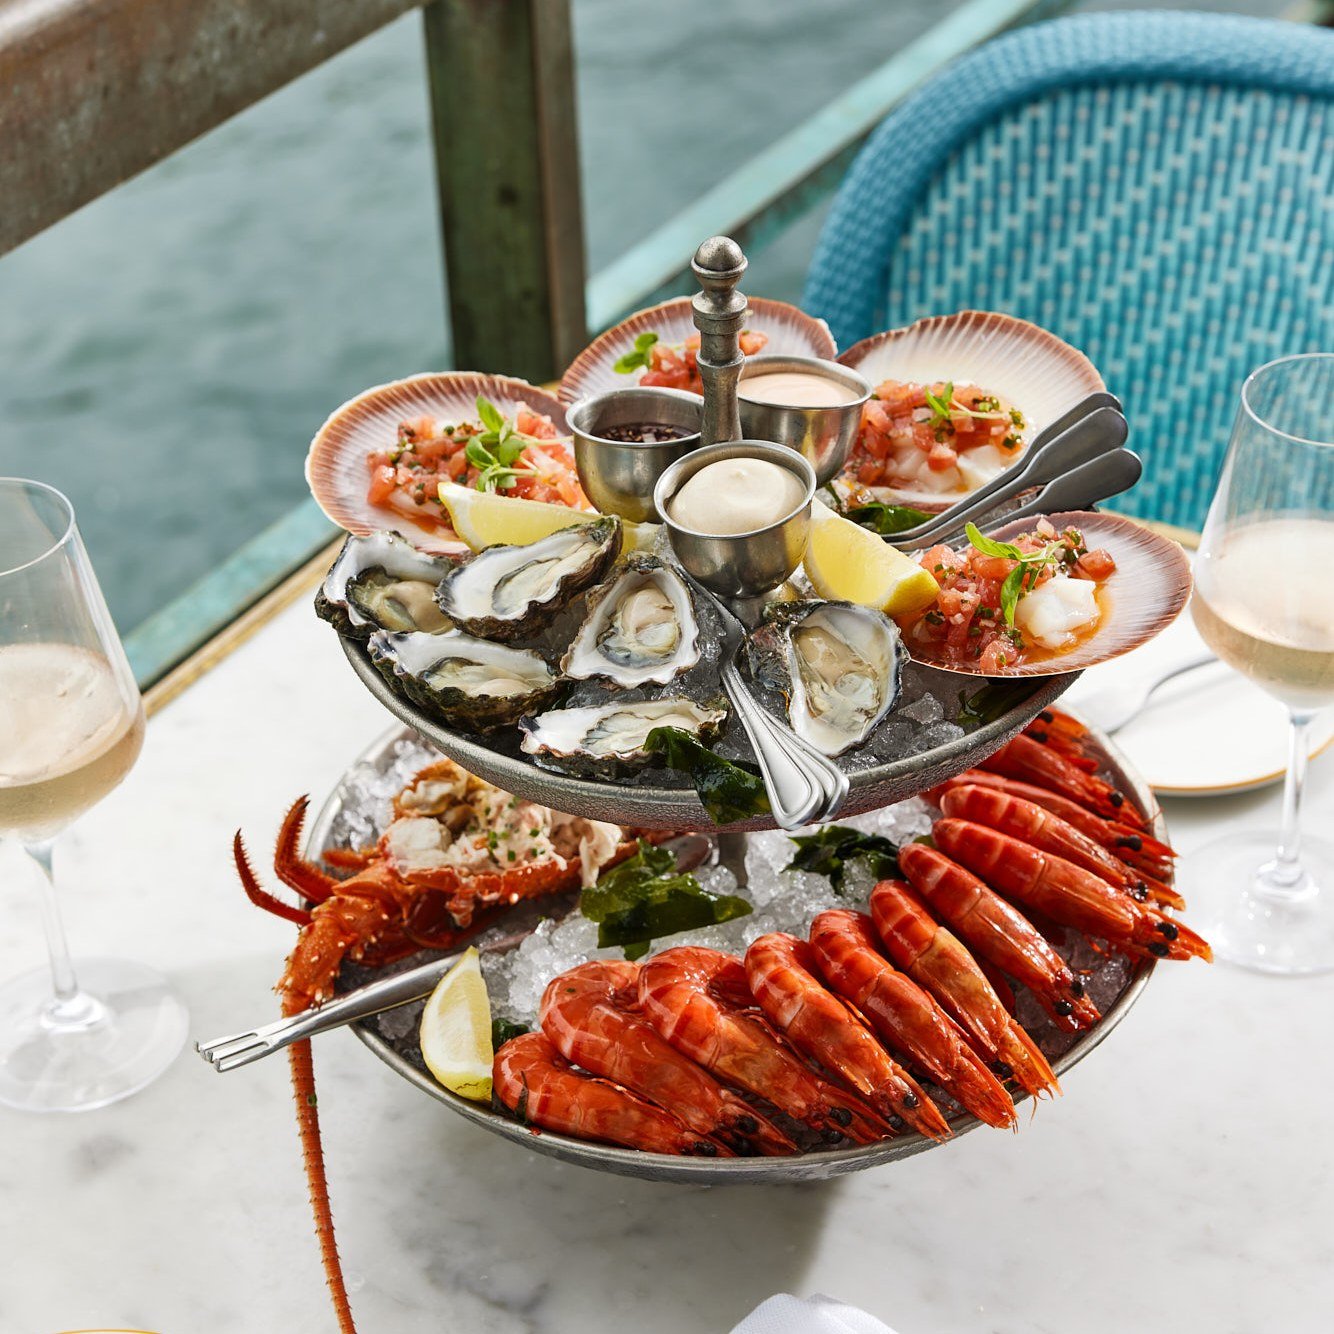 Sundays are for sharing. Share in some of the finest seafood, glittering sunshine and harbour views.

Seafood Platter // &frac12; Lobster, Sydney rock oysters, cooked prawns, &frac12; shell scallop crudo, mignonnette, aioli

#whalerbridge